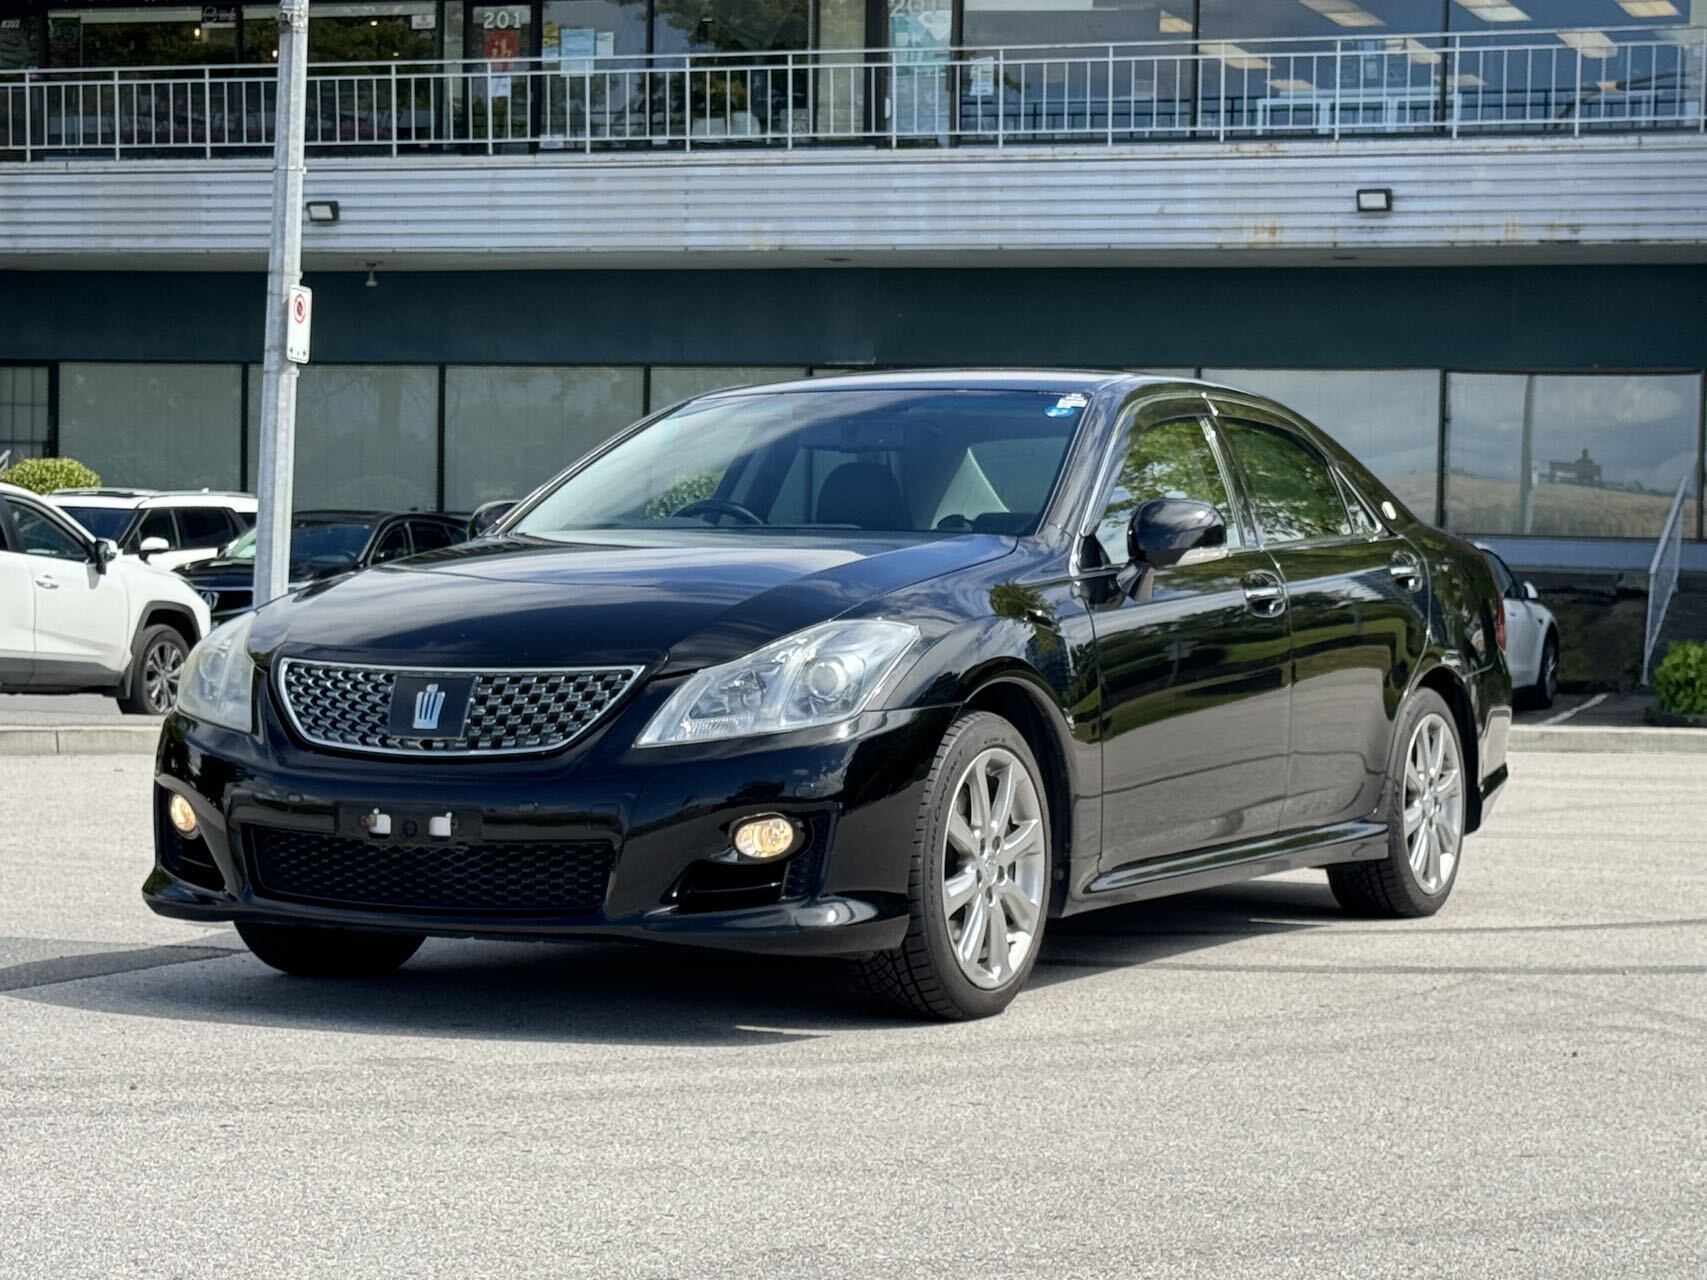 2008 Toyota Crown Toyota Crown Athlete Japanese Imported